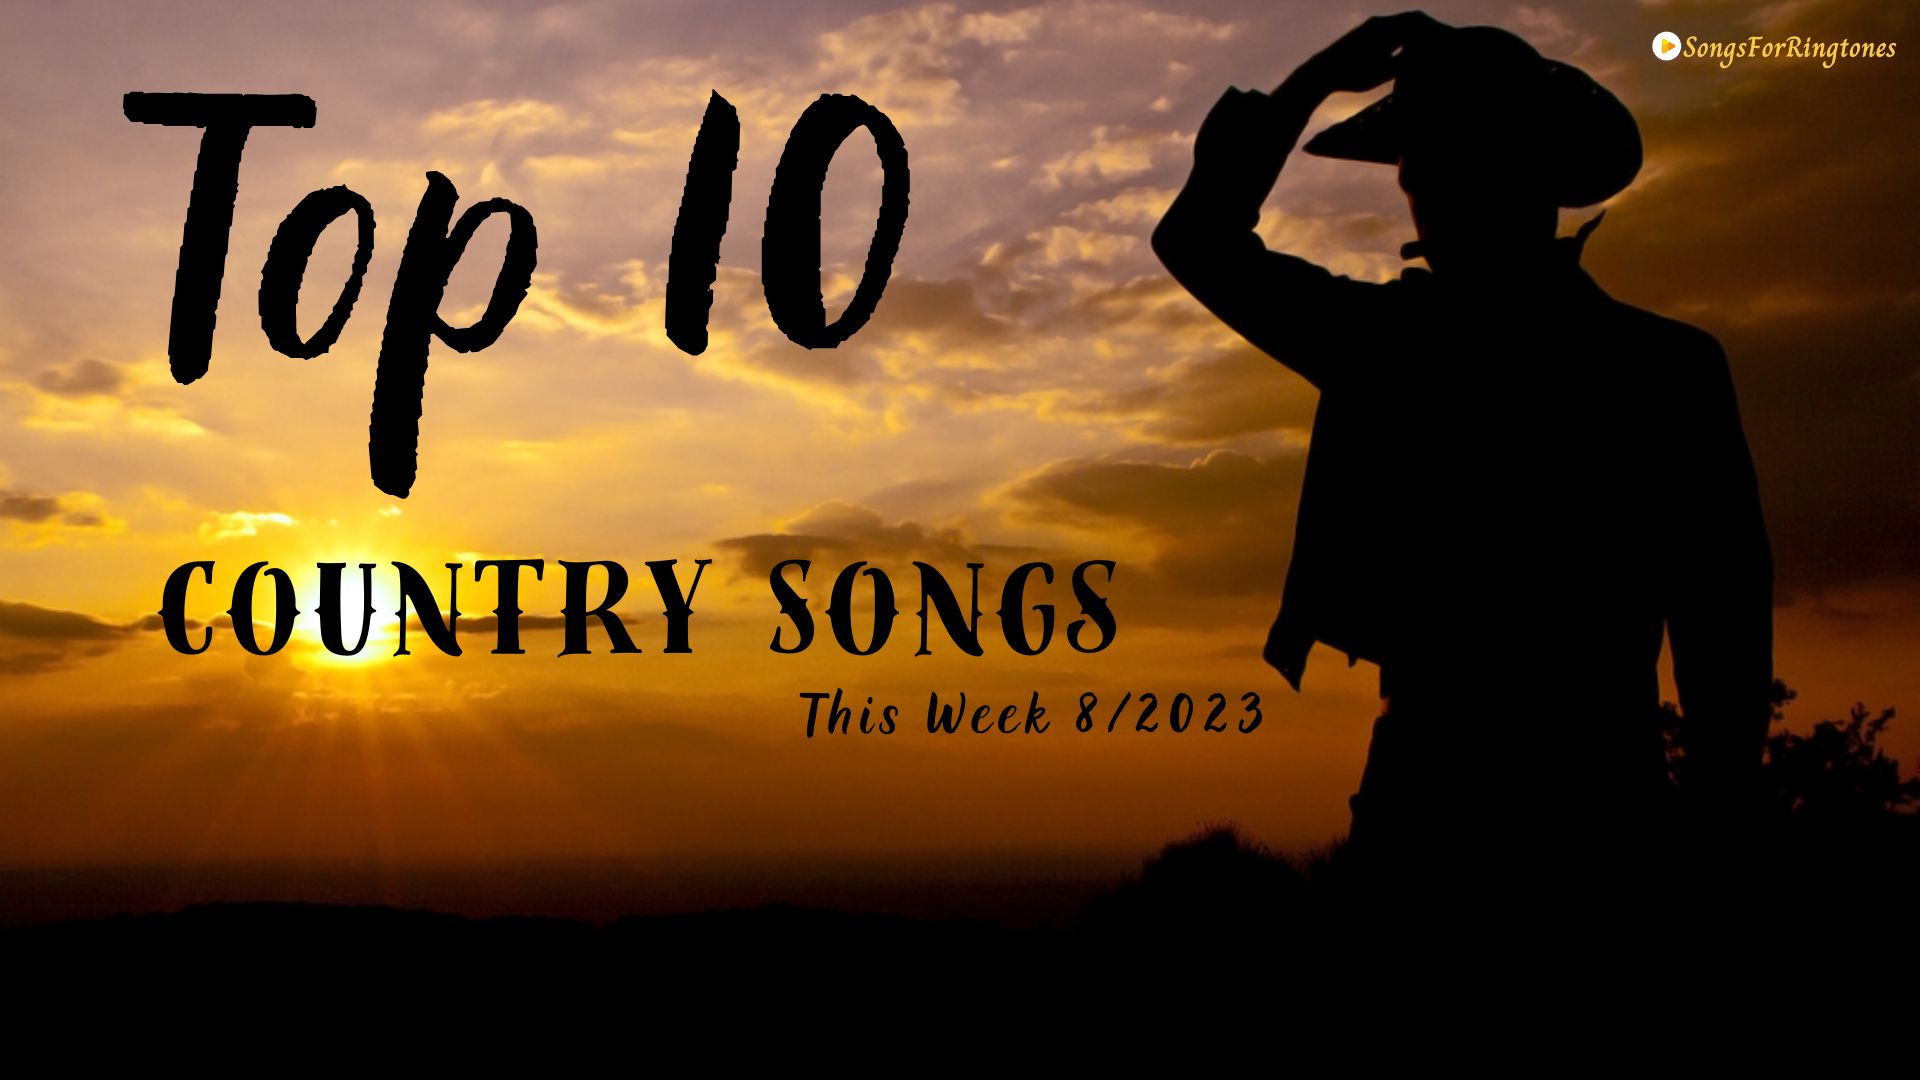 Top 10 Country Songs This Week (Updated 8/2023) – The Hottest Tracks in Country Music Right Now